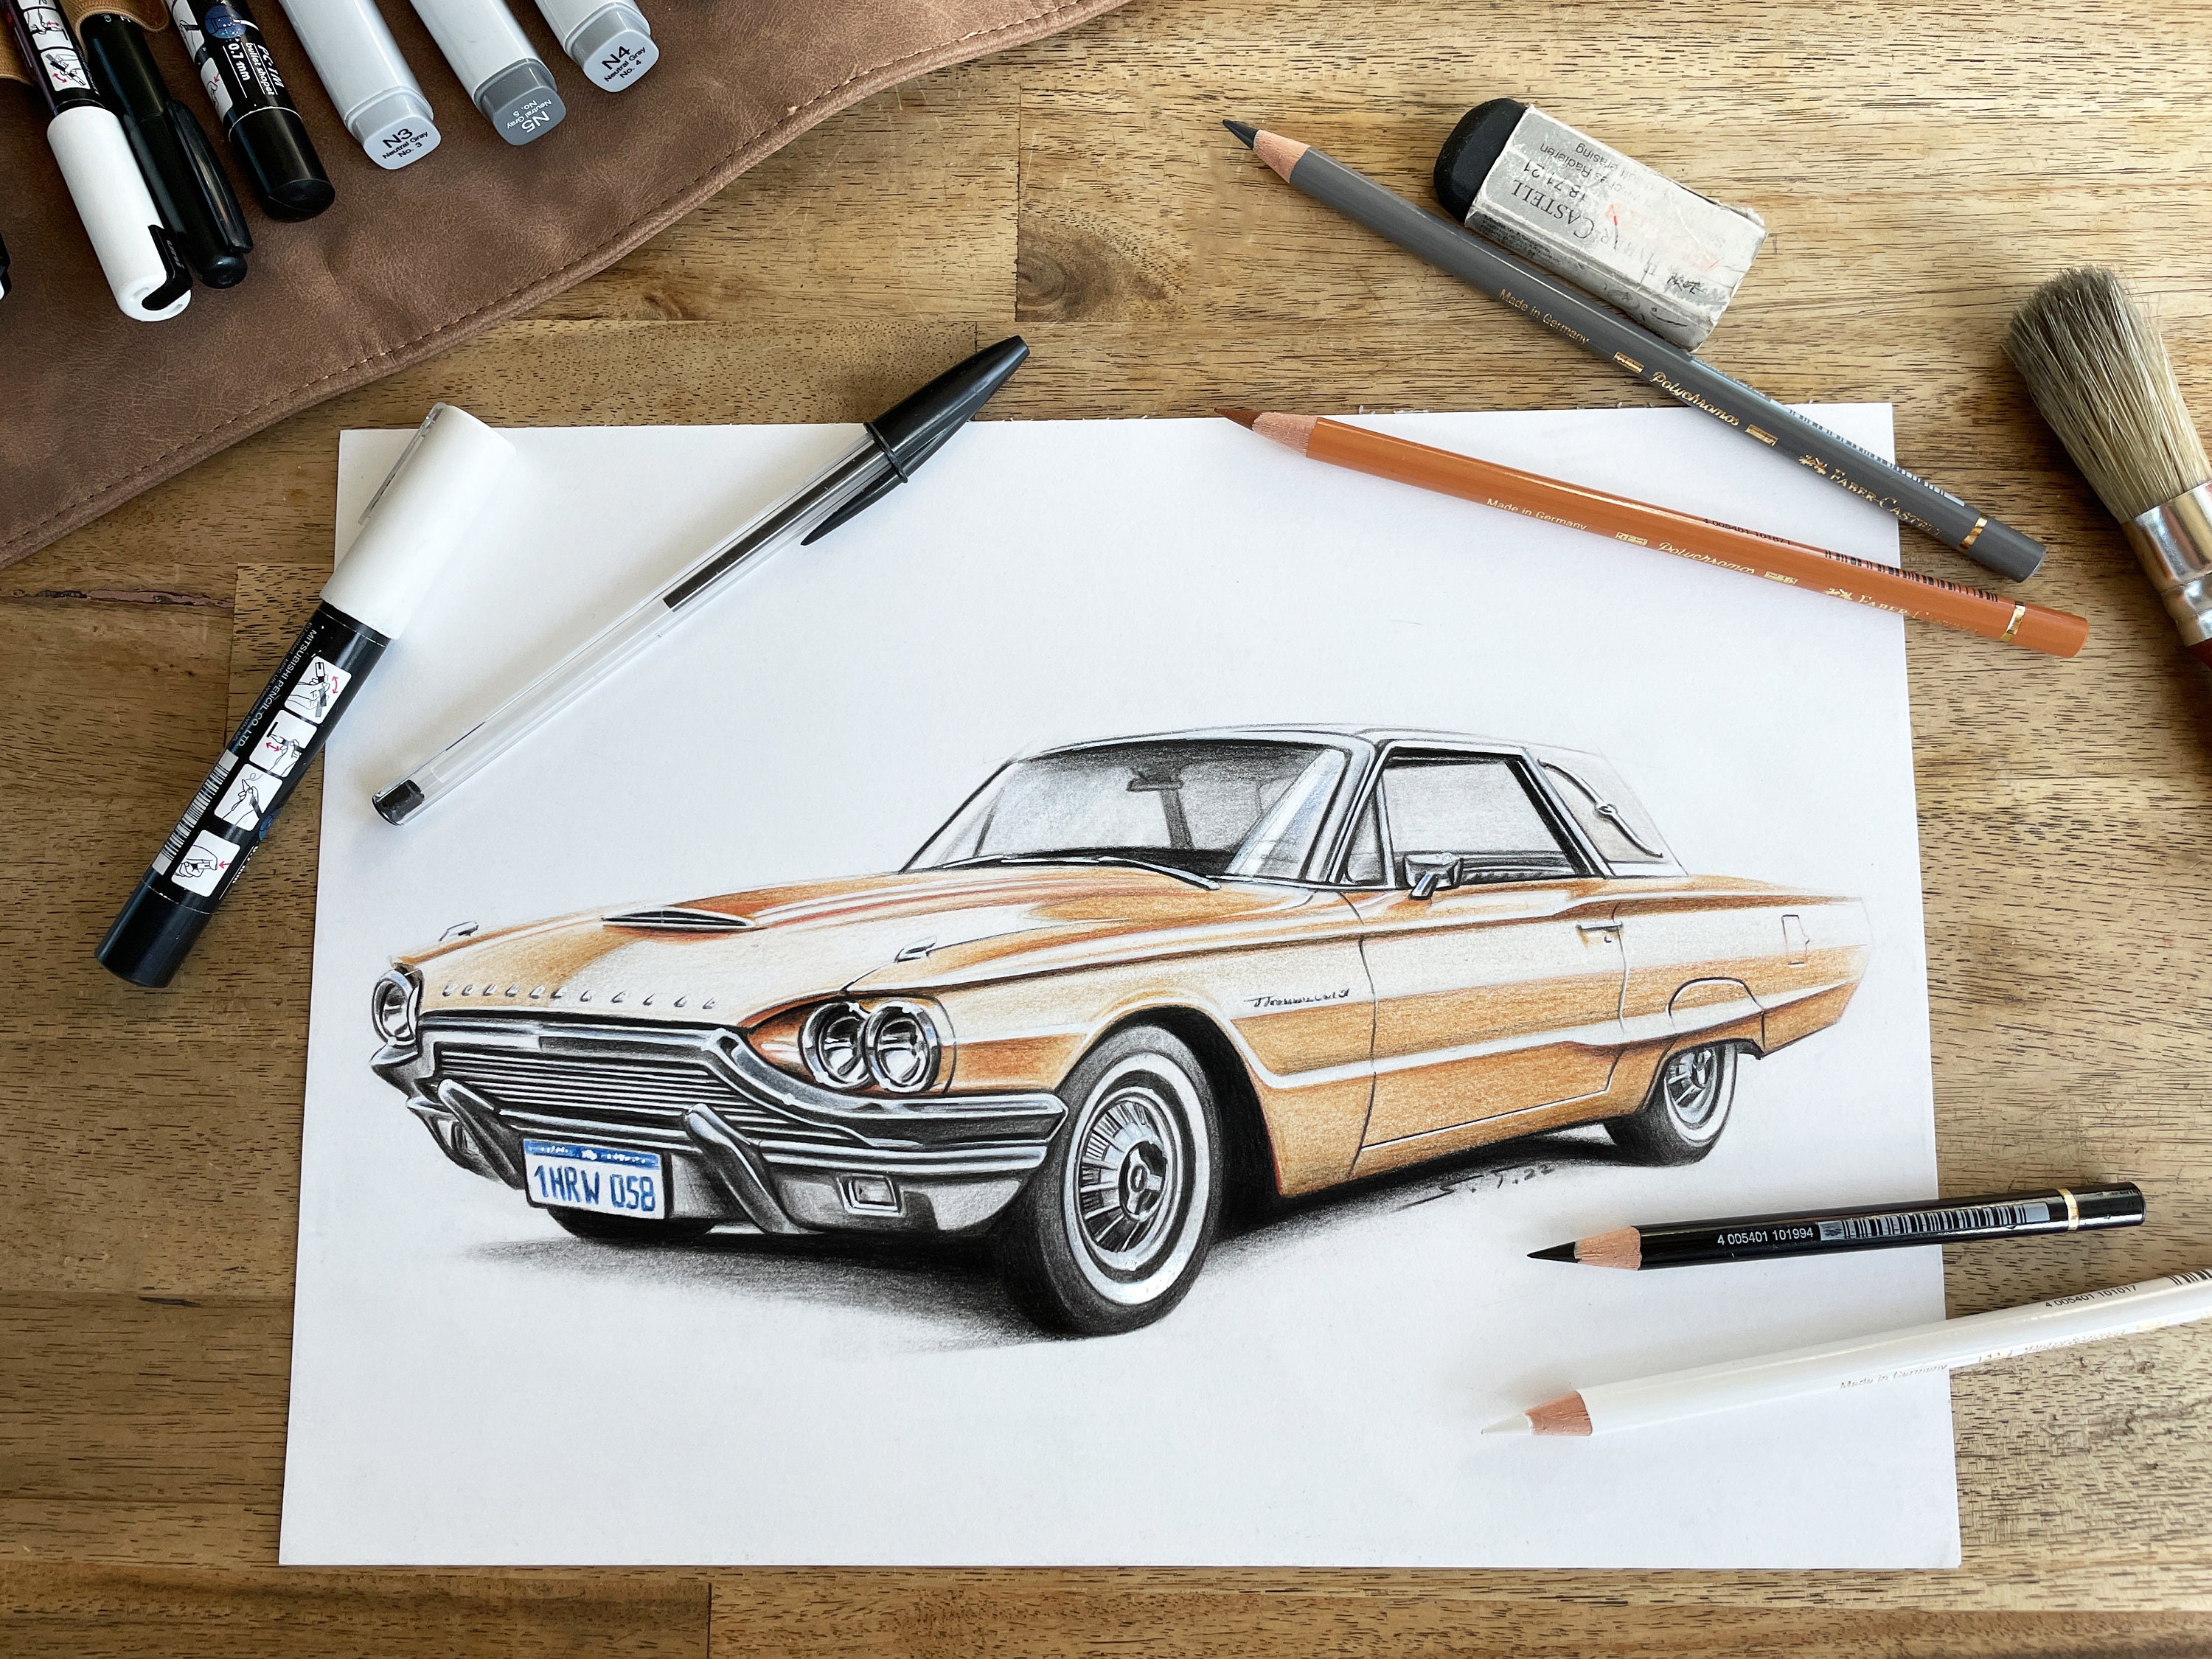 Original Classic Car Drawing / Hand Drawing in Color Based on a